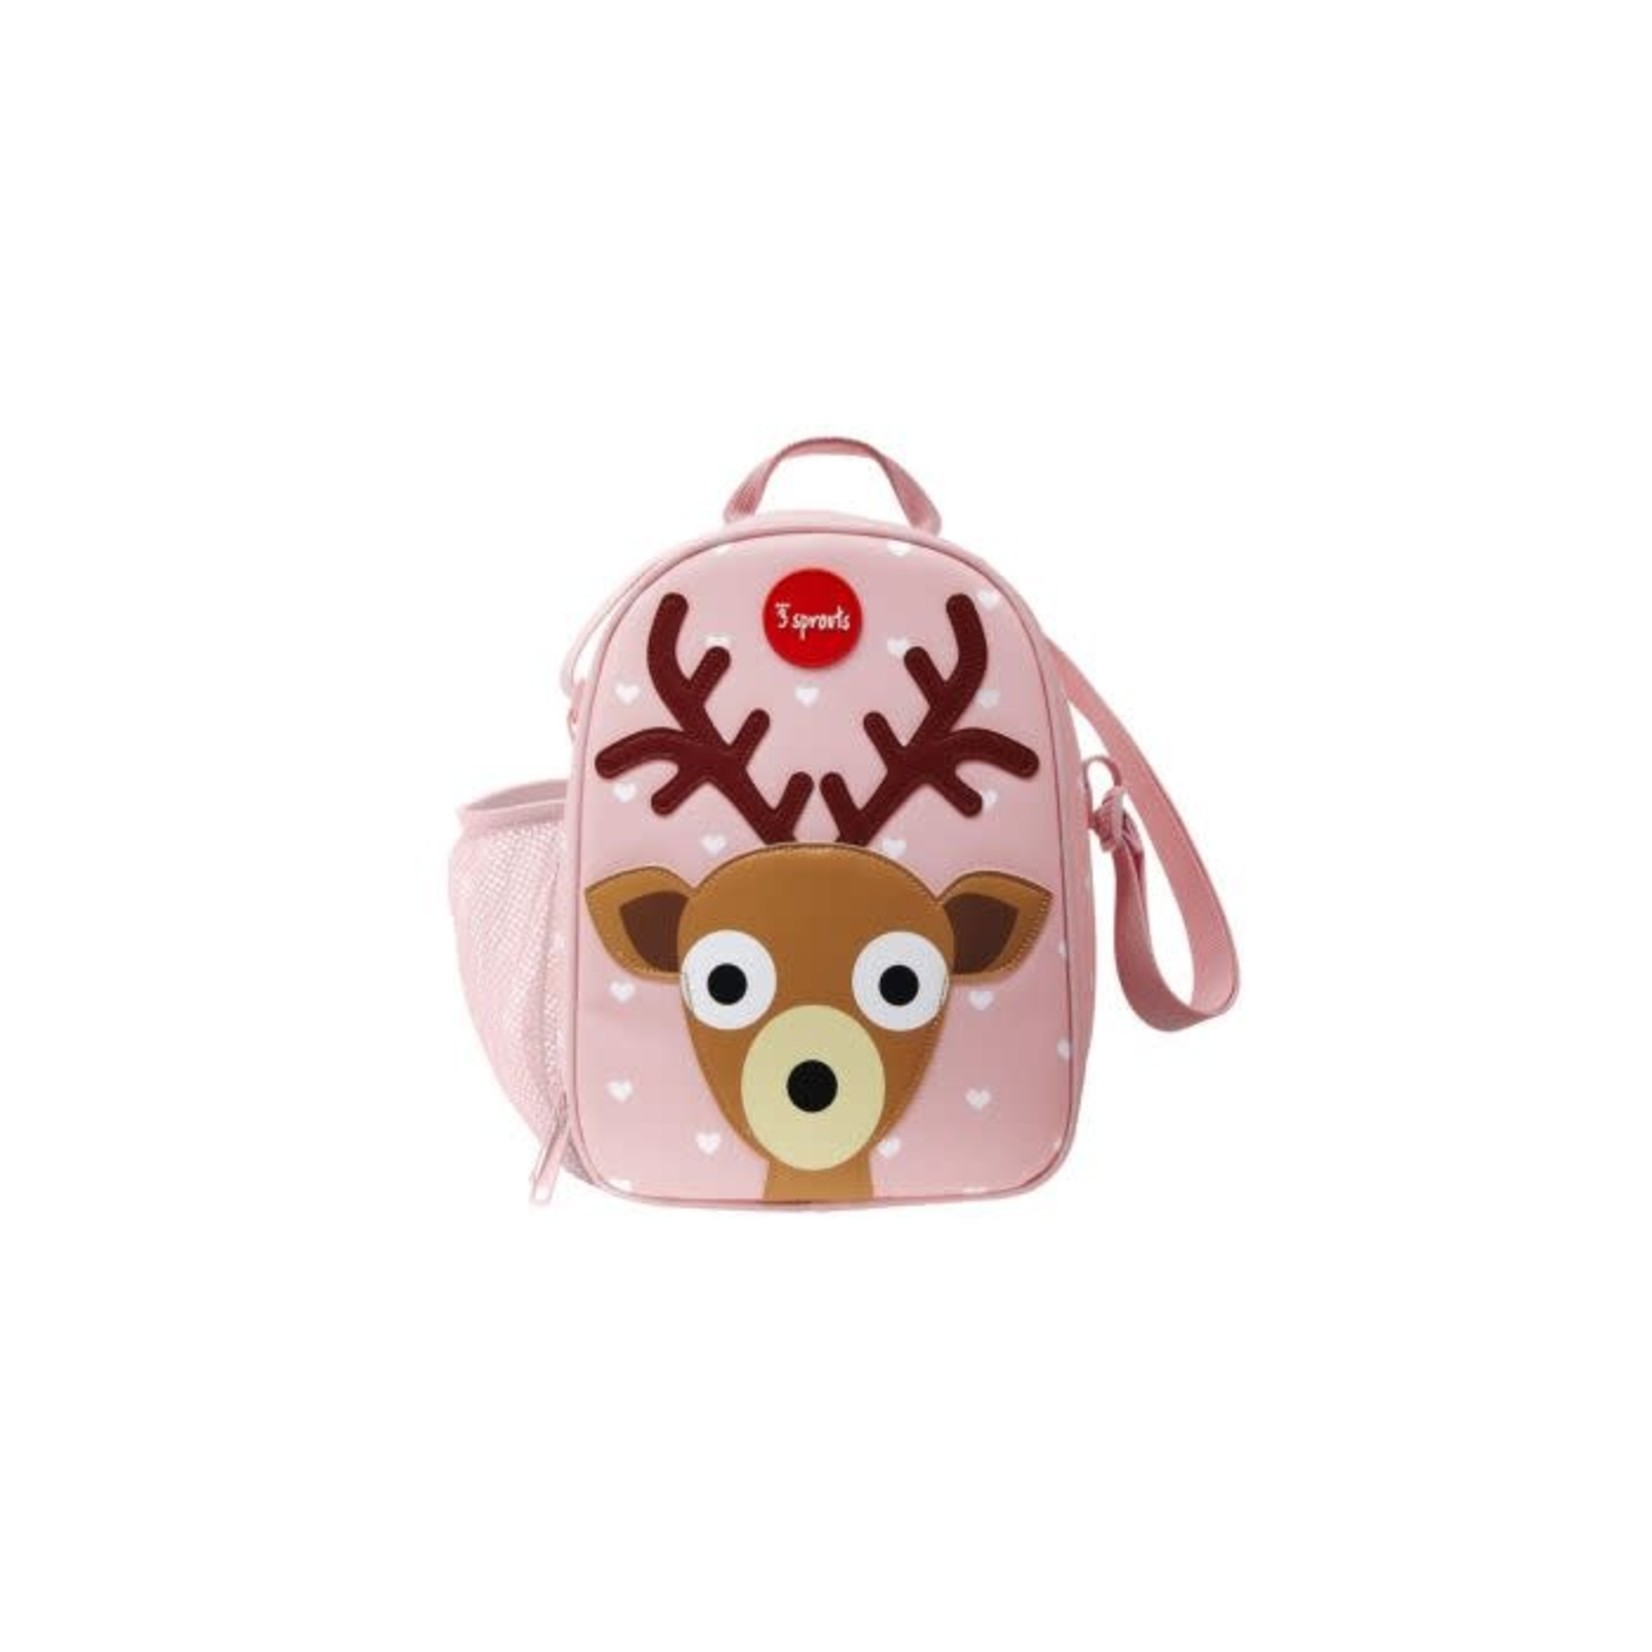 3 sprouts Insulated Lunchbag (Deer)